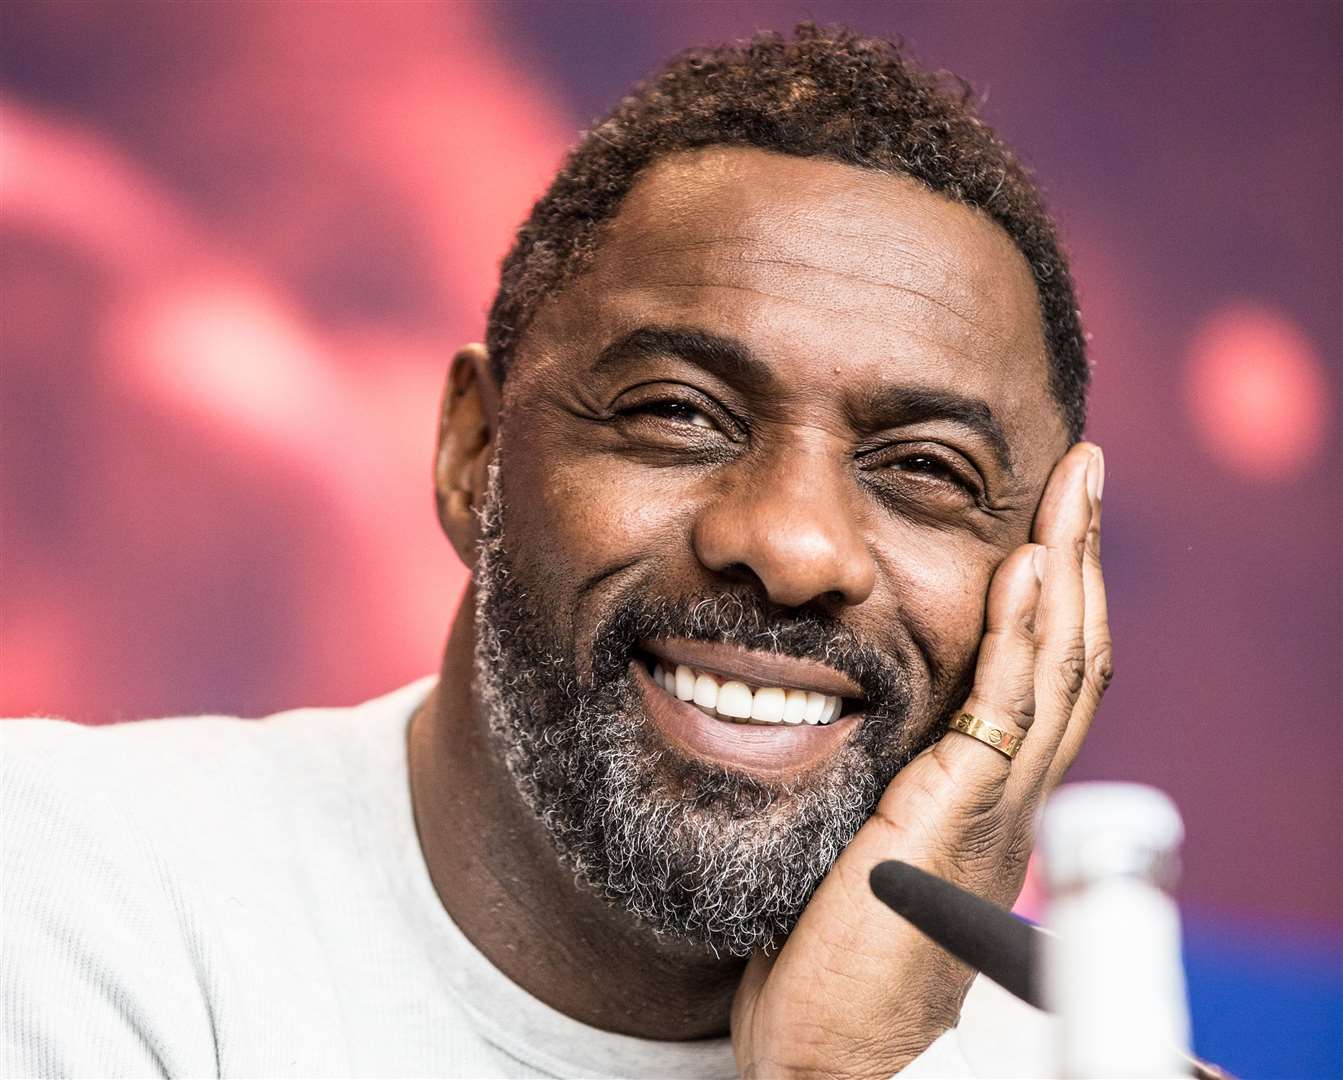 Idris Elba is coming to The Source Bar, Maidstone